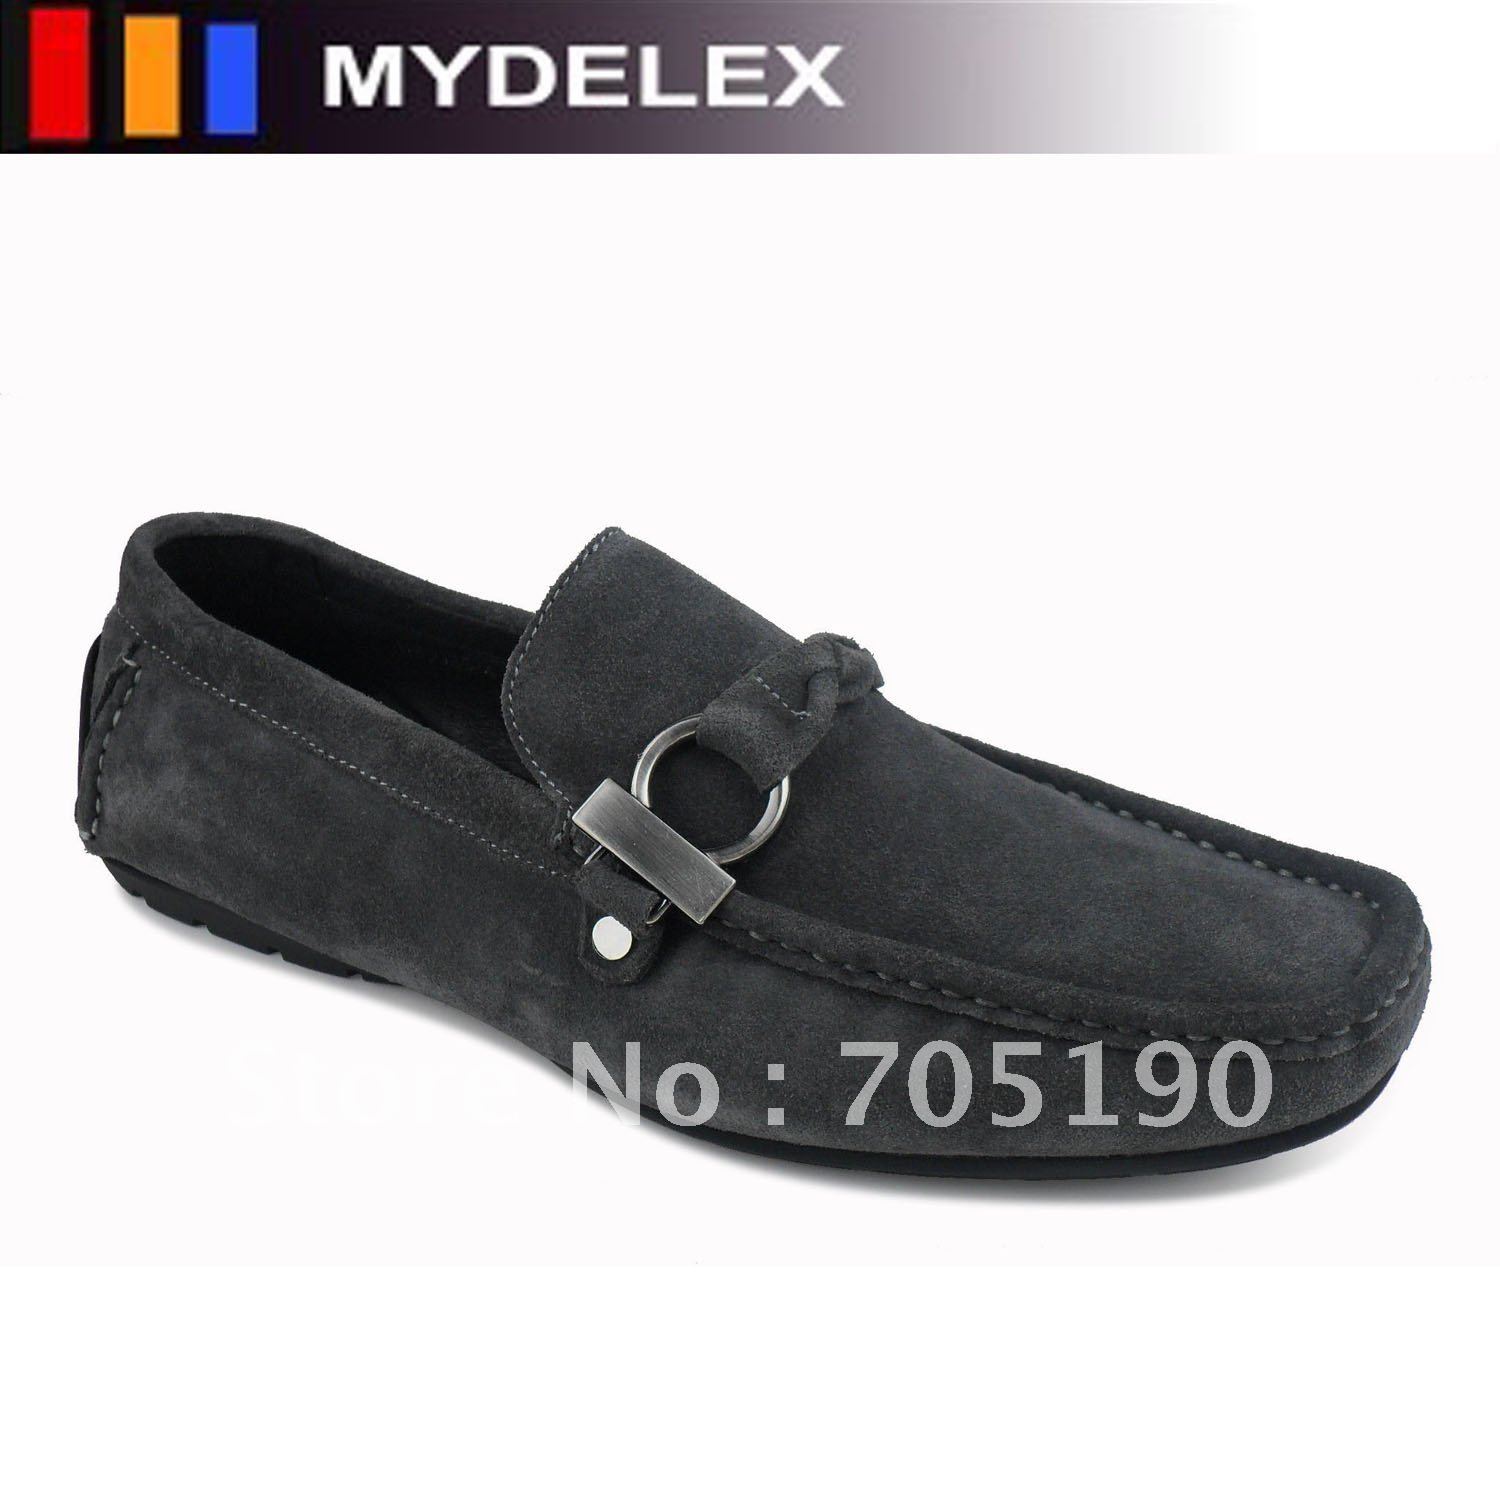 order shoes online free shipping